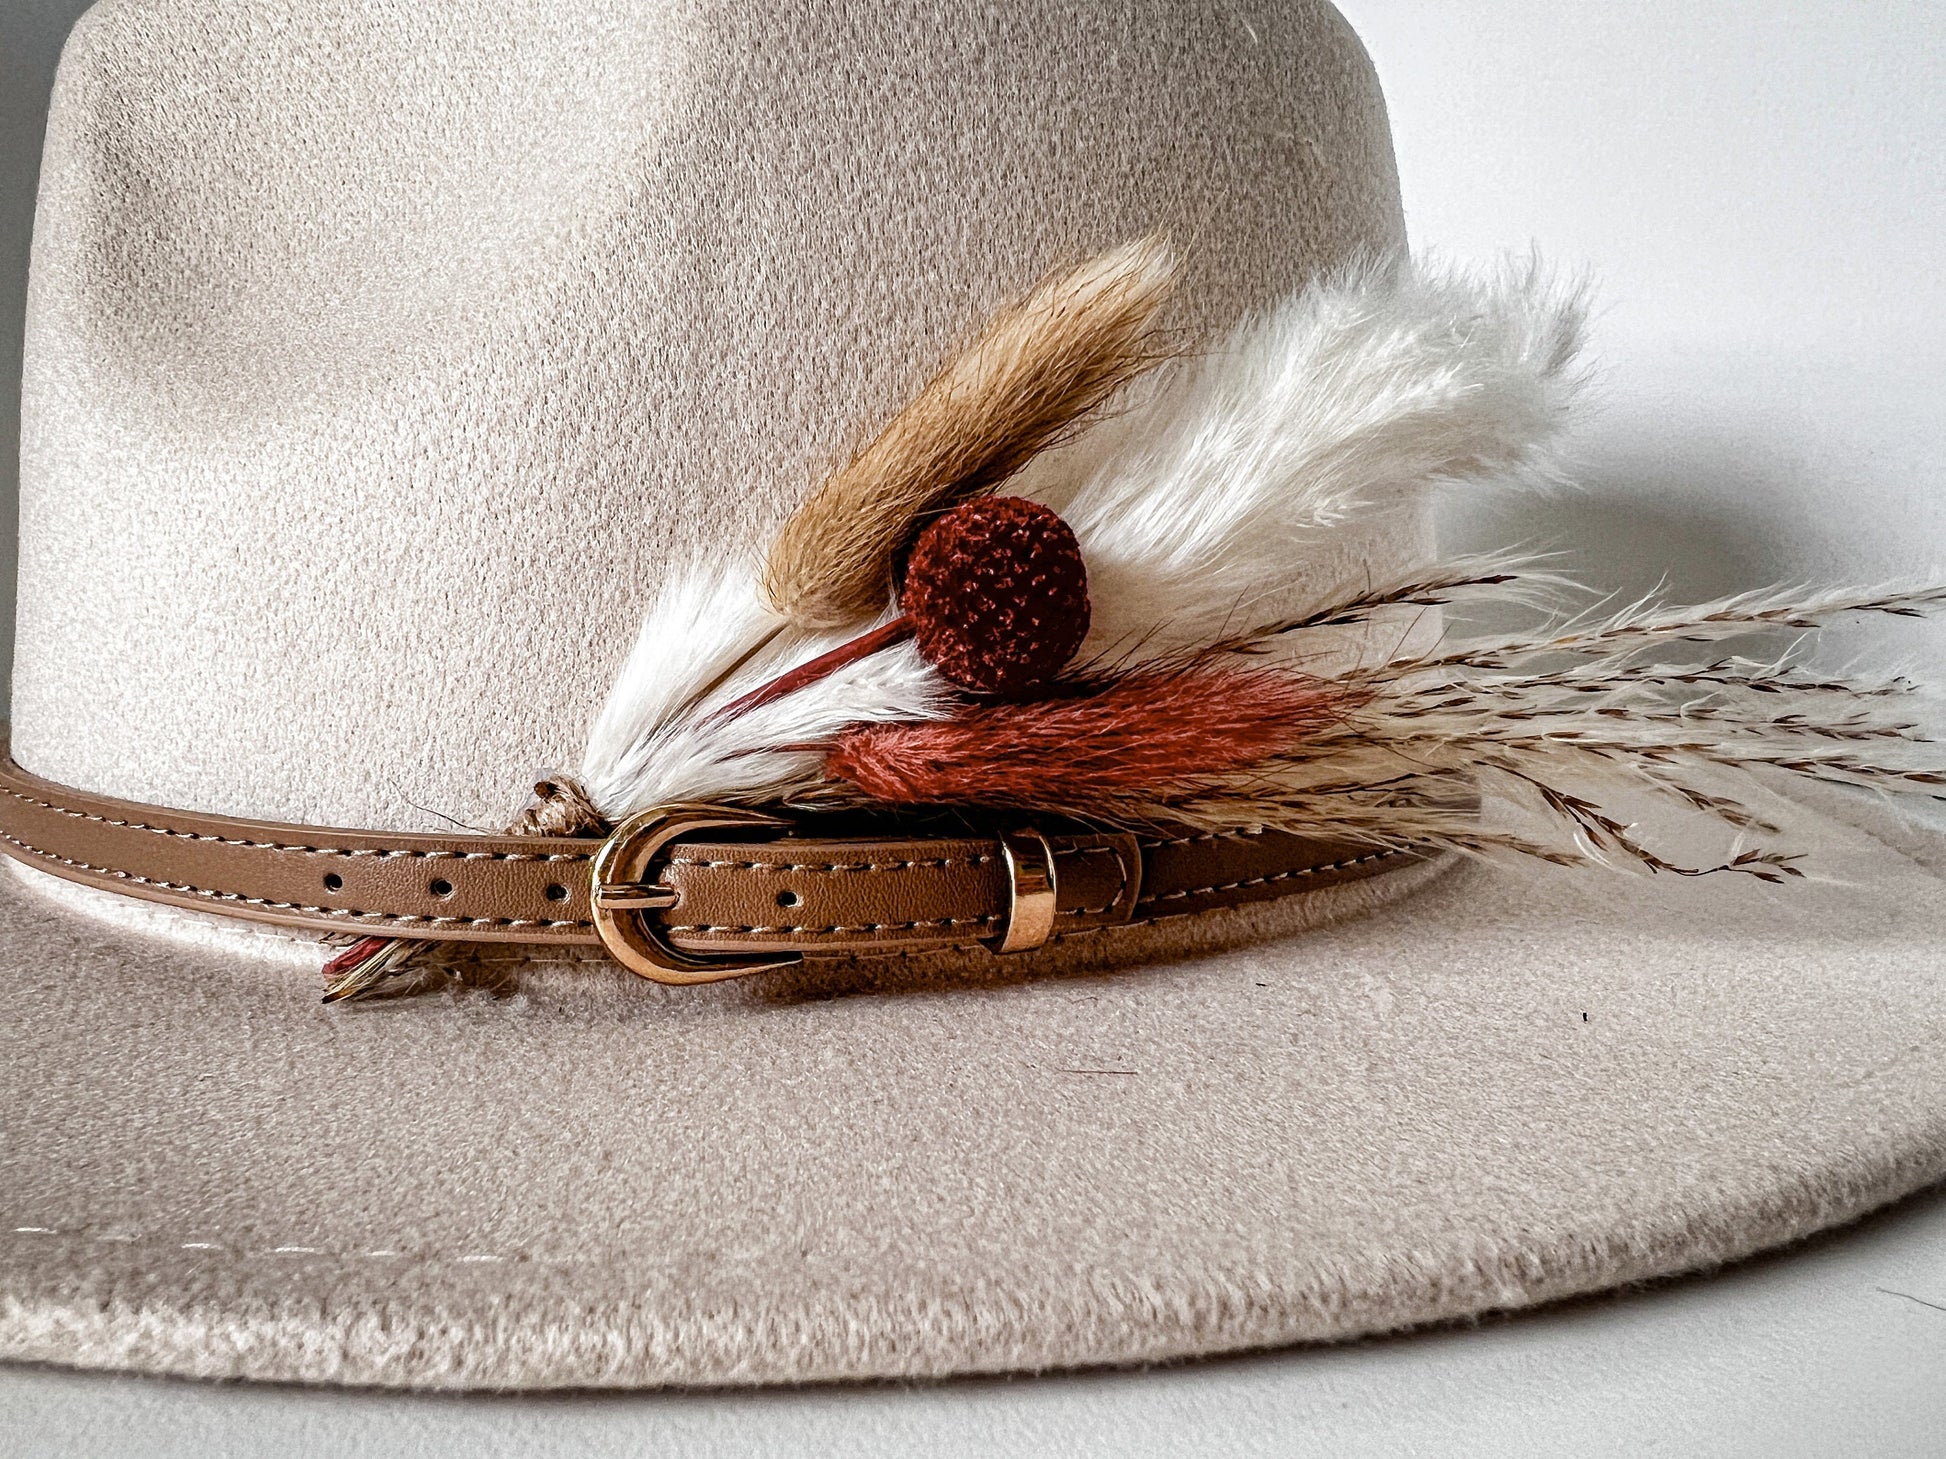 Hat 'feathers', Dried Flowers and Feather Accent for Hat, Feathers